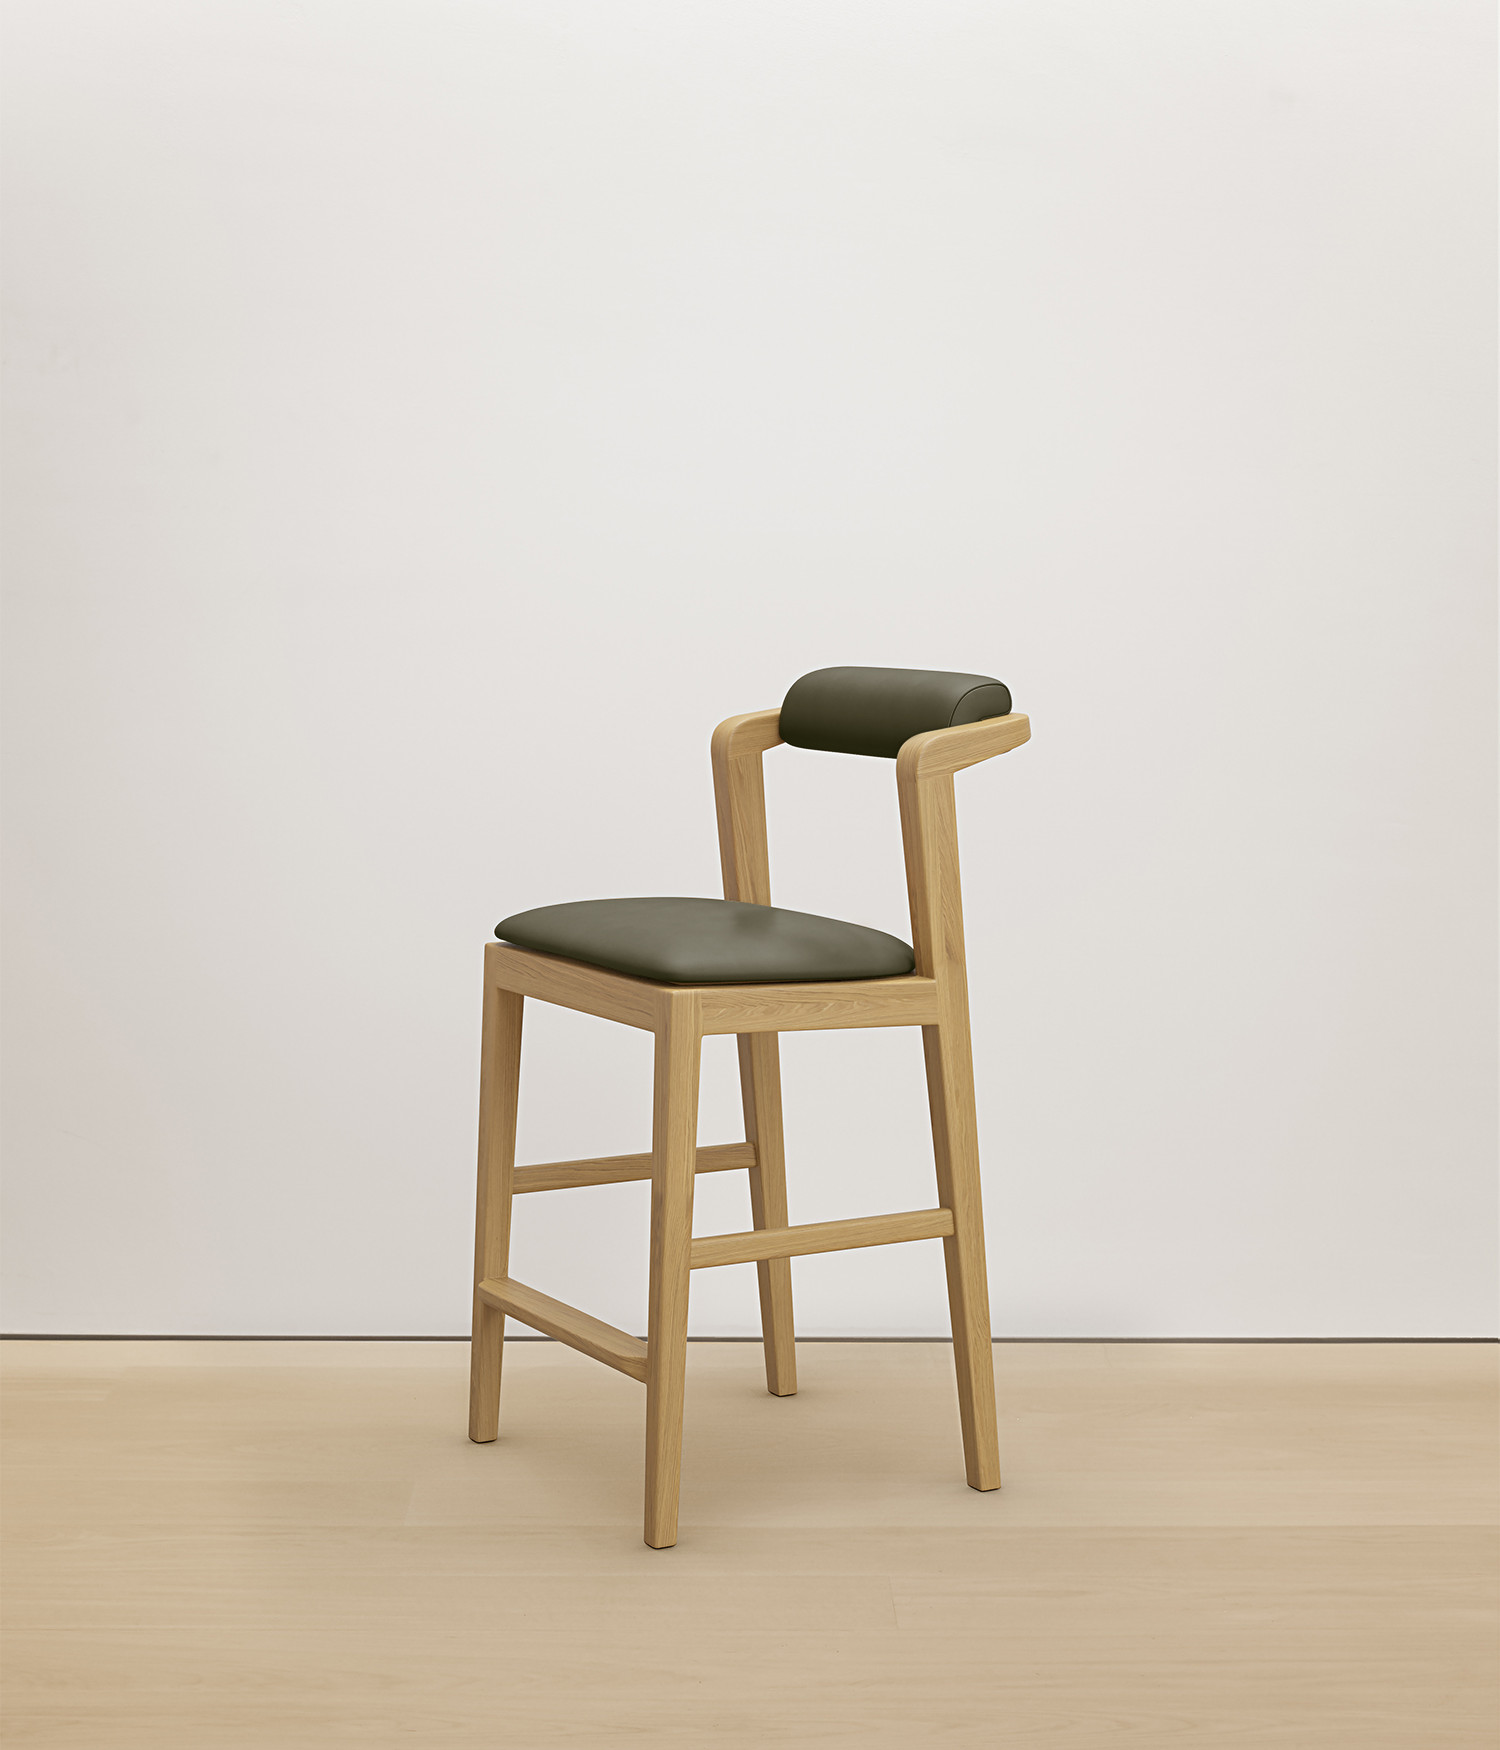  white-oak stool with forest color upholstered seat